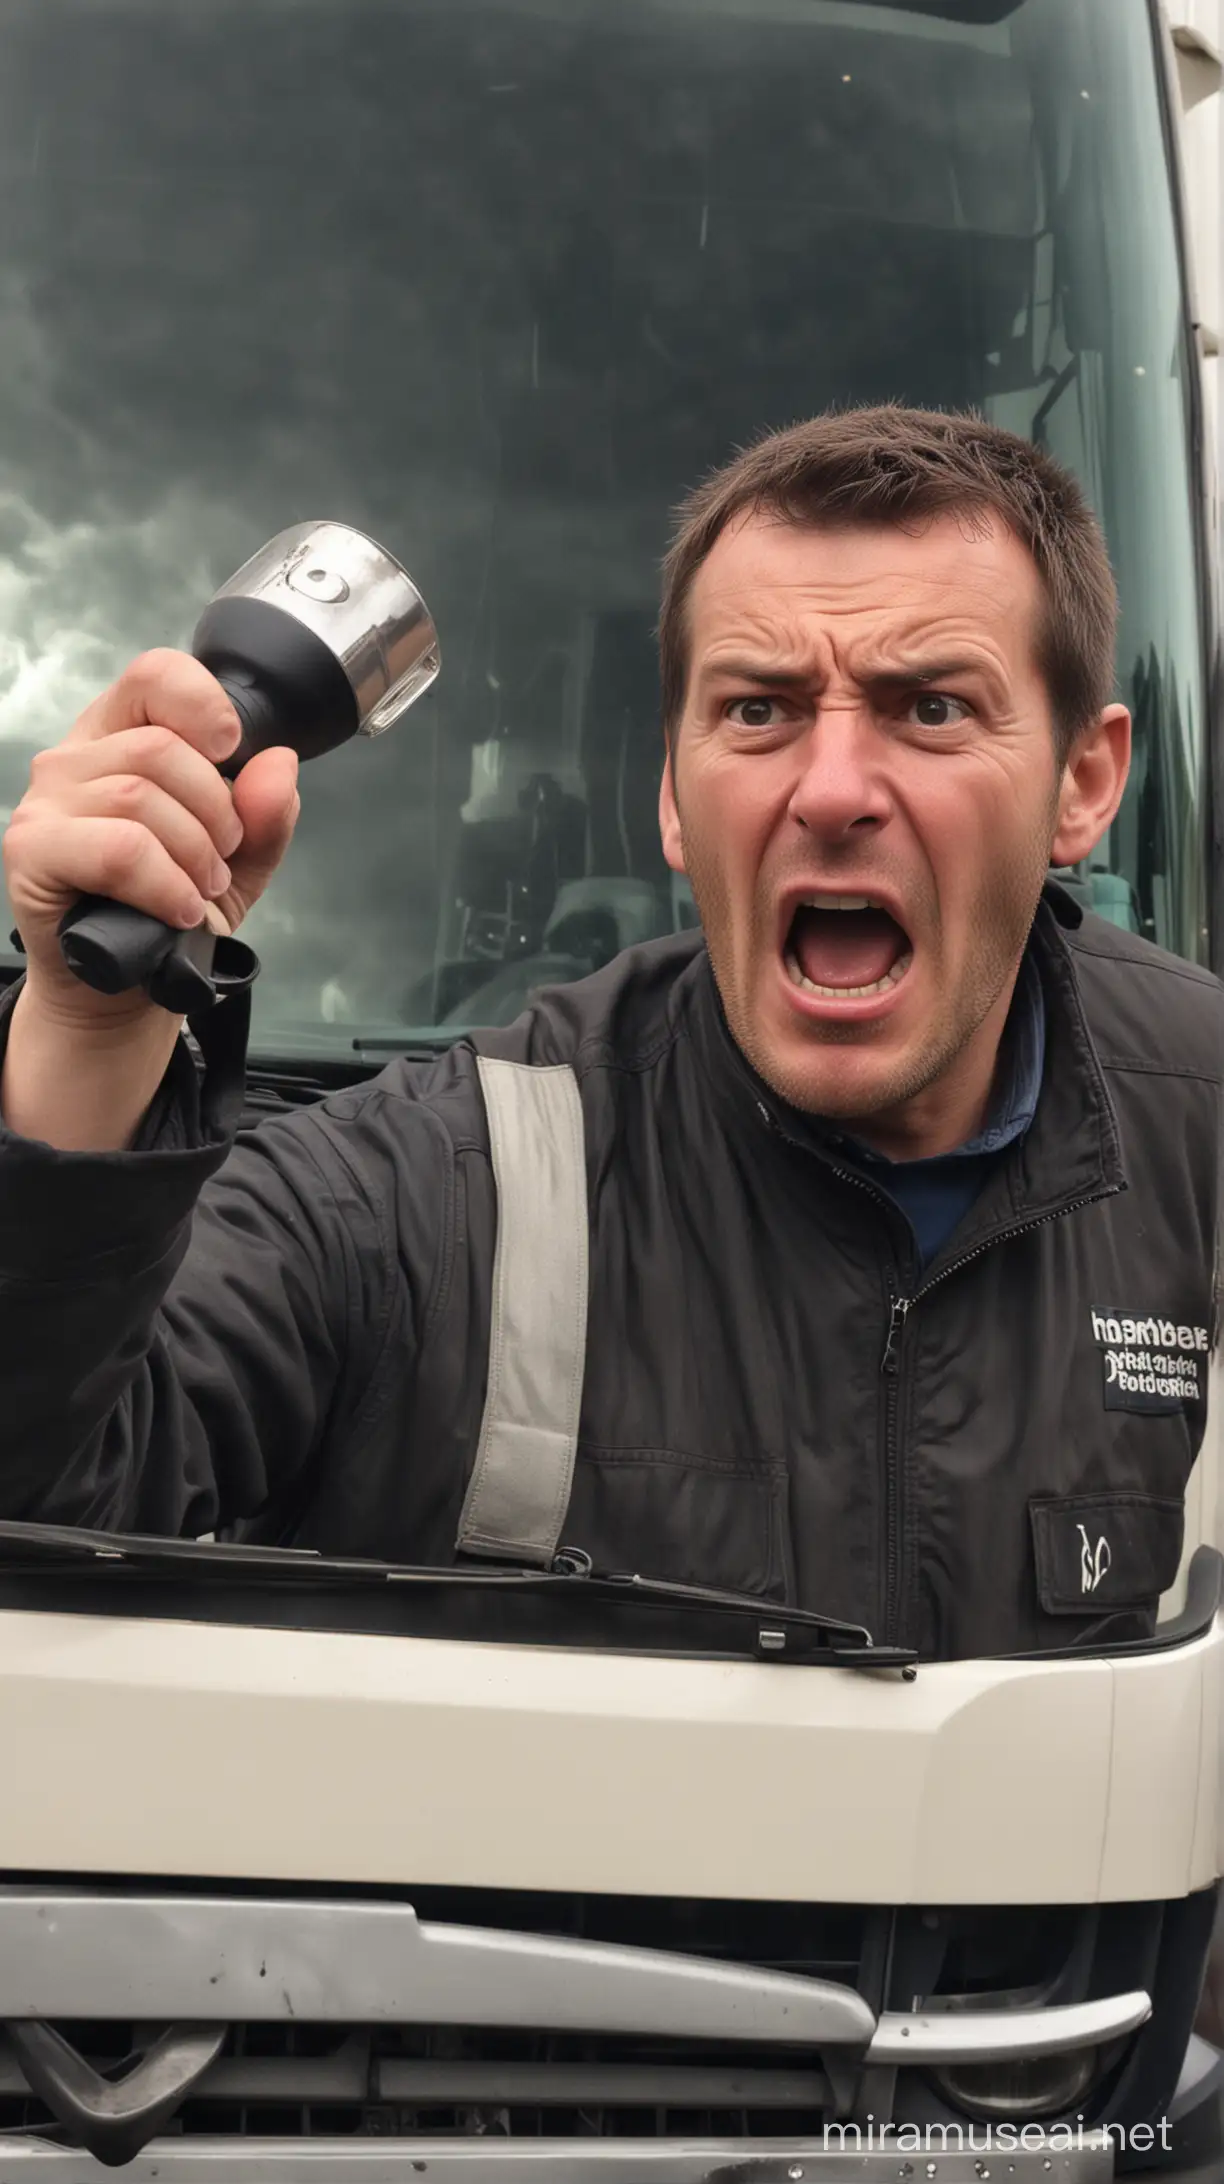 Angry Truck Driver Holding a Bright Flashlight